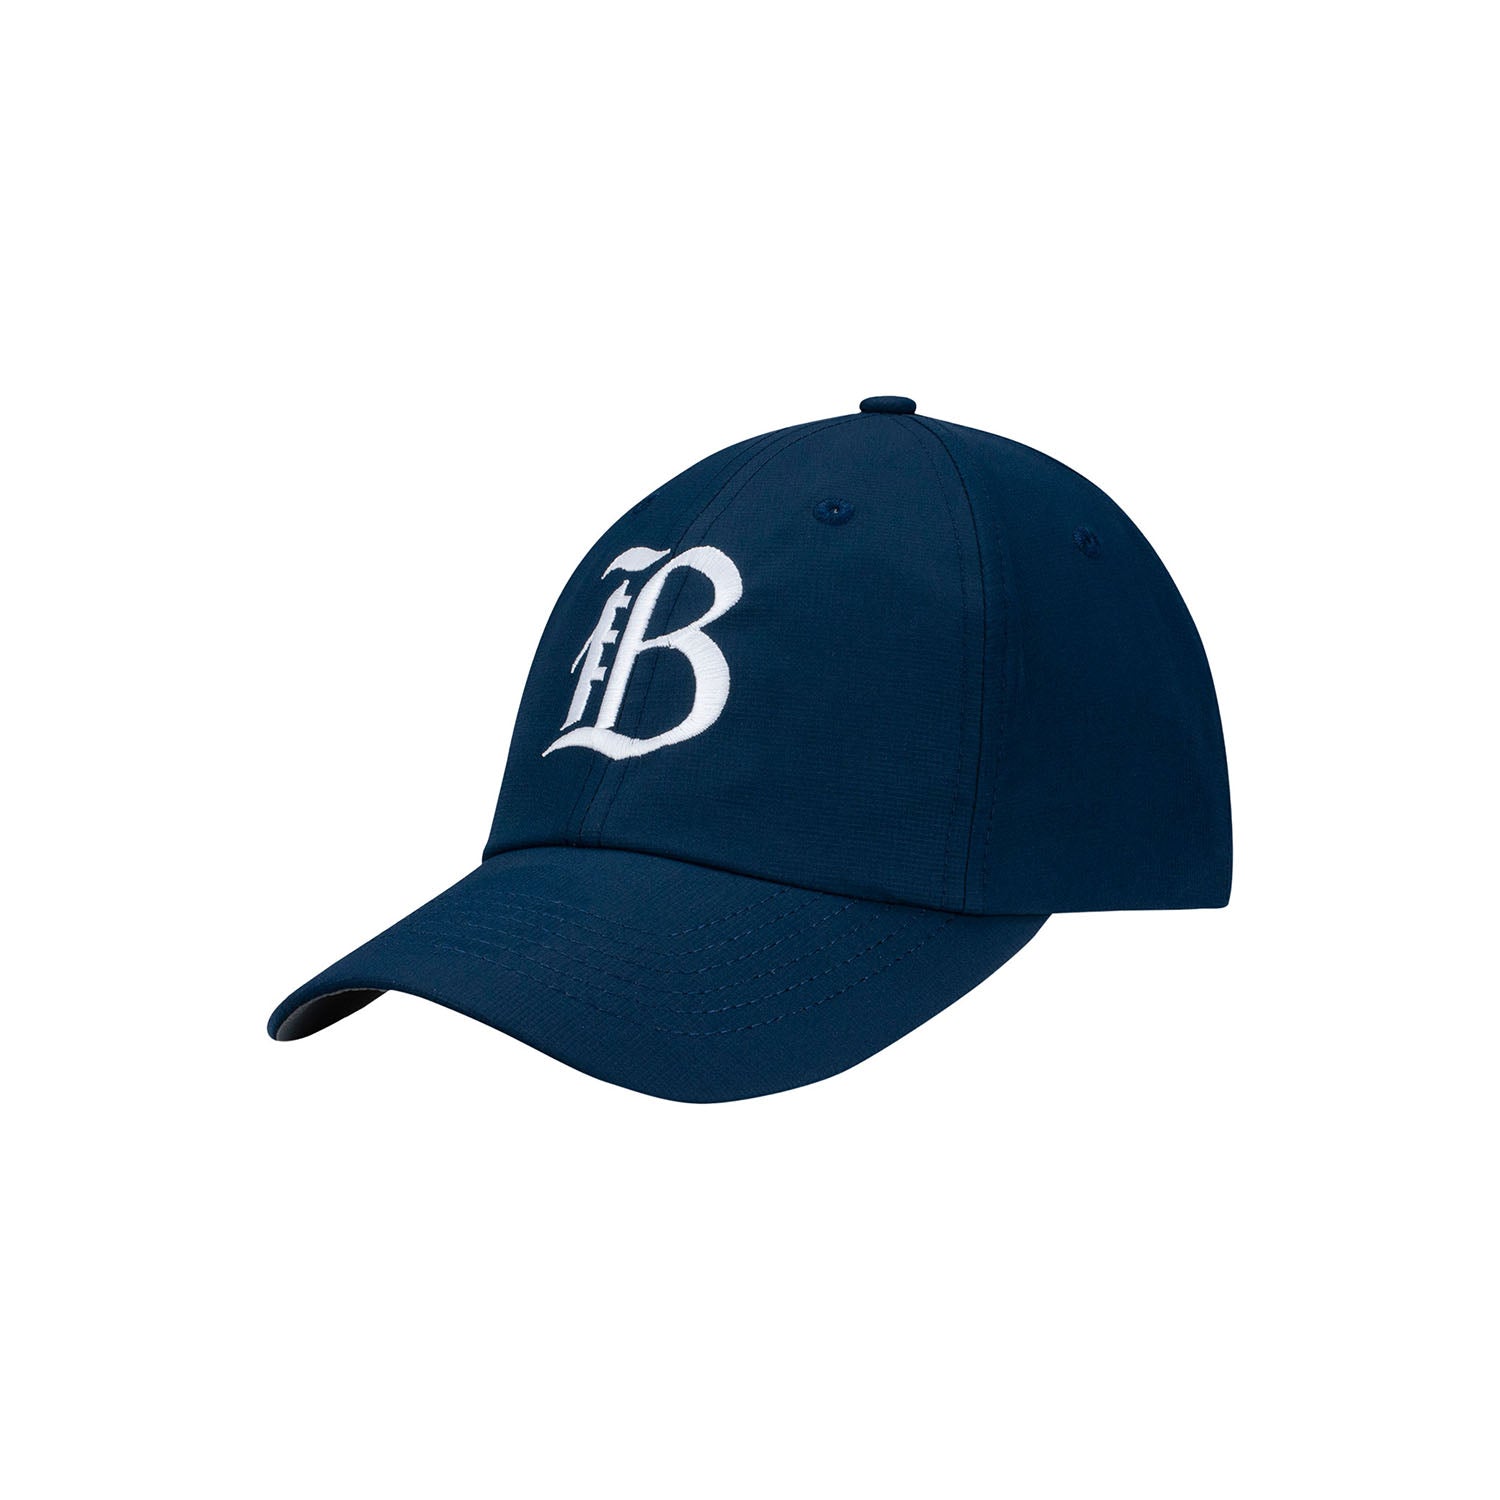 Unisex Bay FC Navy Hat - Angled Left Side View